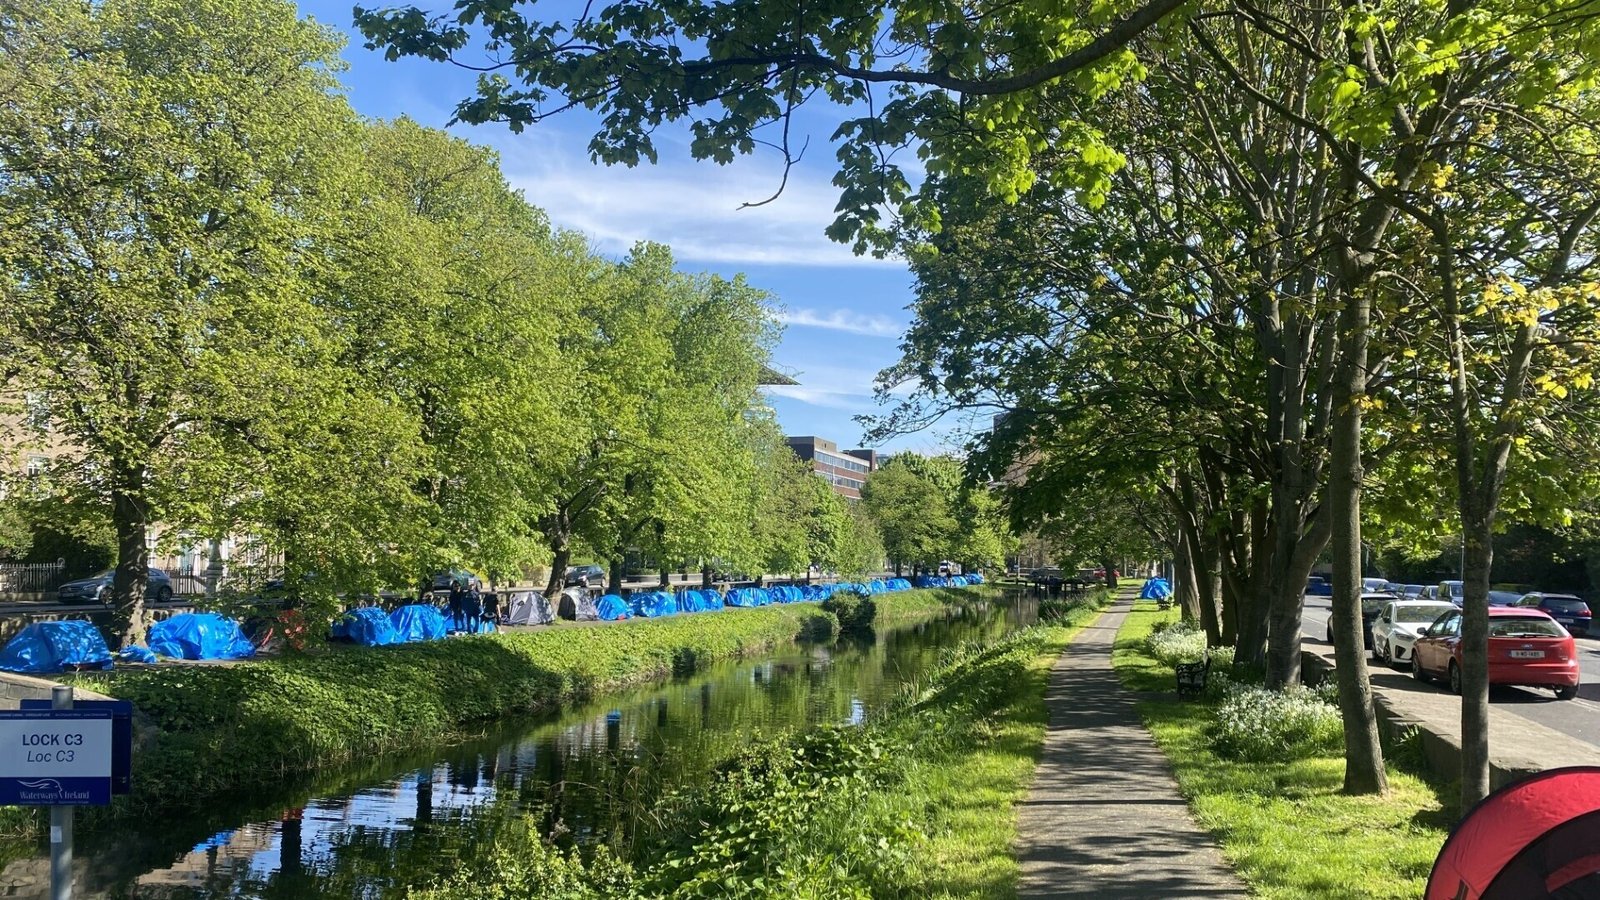 There are now more than 70 tents sheltering unaccommodated asylum seekers pitched along both sides of the Grand Canal in Dublin.